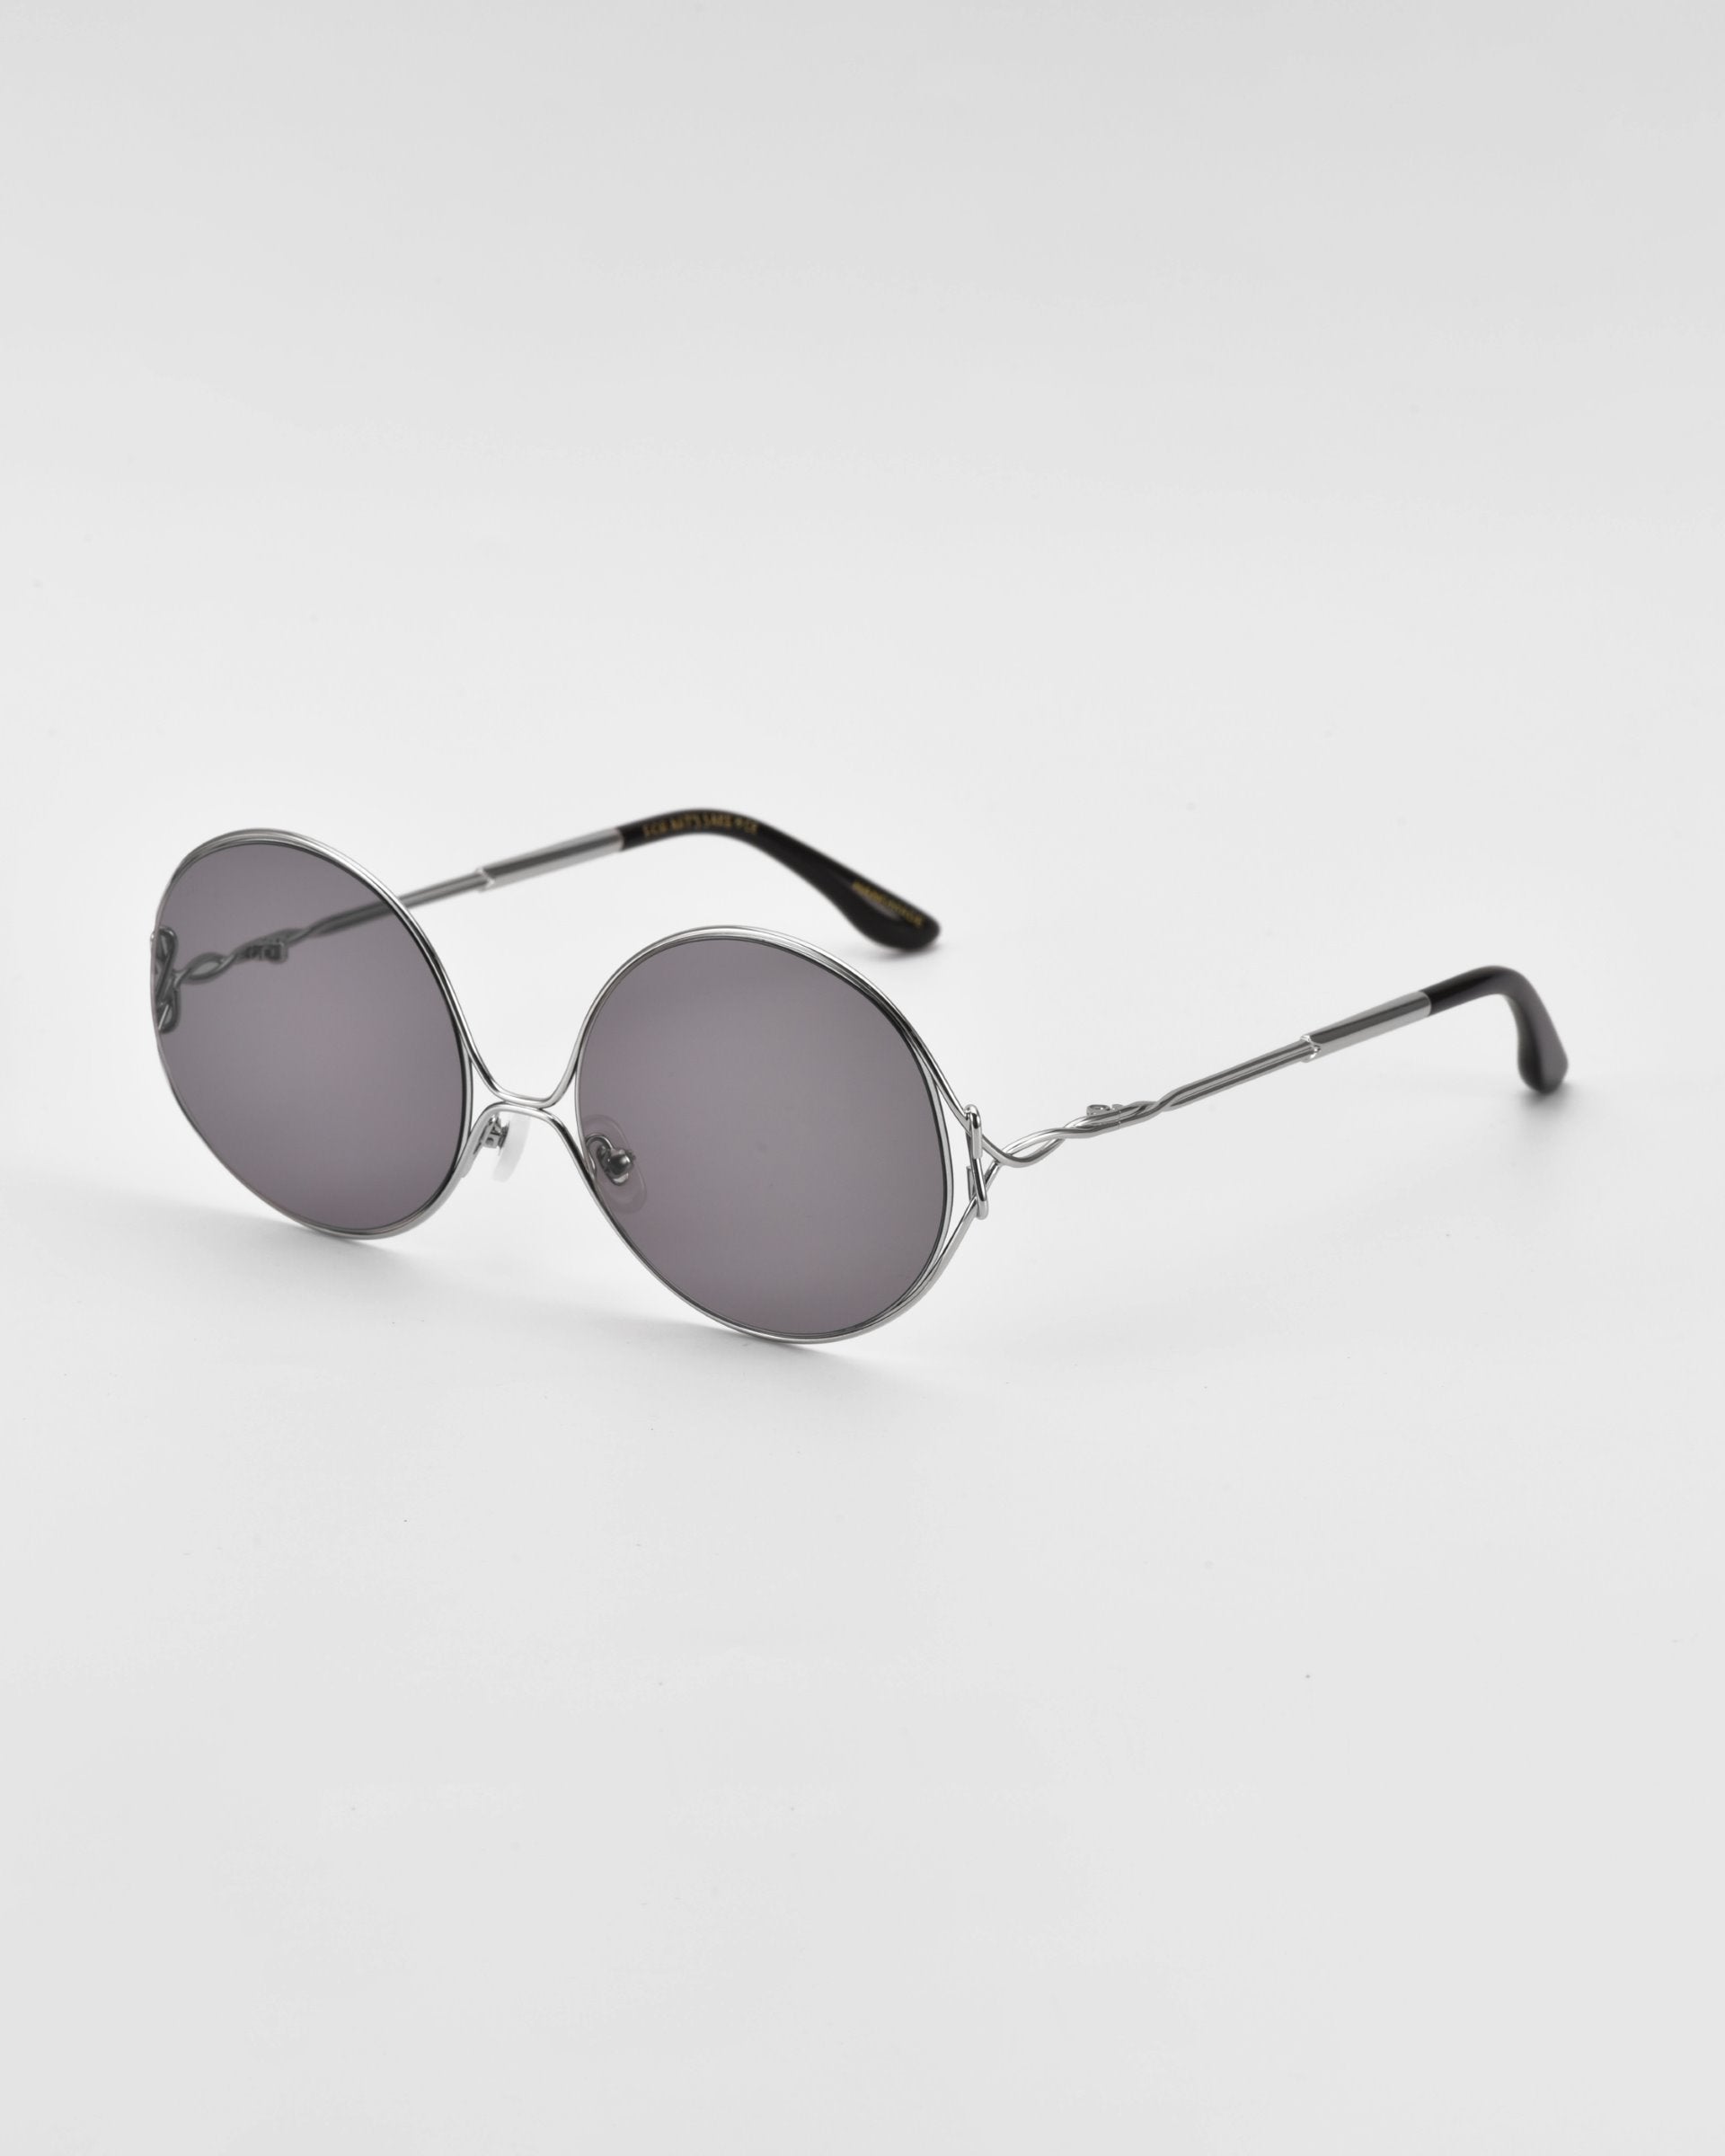 A pair of For Art&#39;s Sake® Aura retro-inspired sunglasses with gradient tinted lenses and a thin, silver metal frame lies on a white surface. The temples are black at the ends.